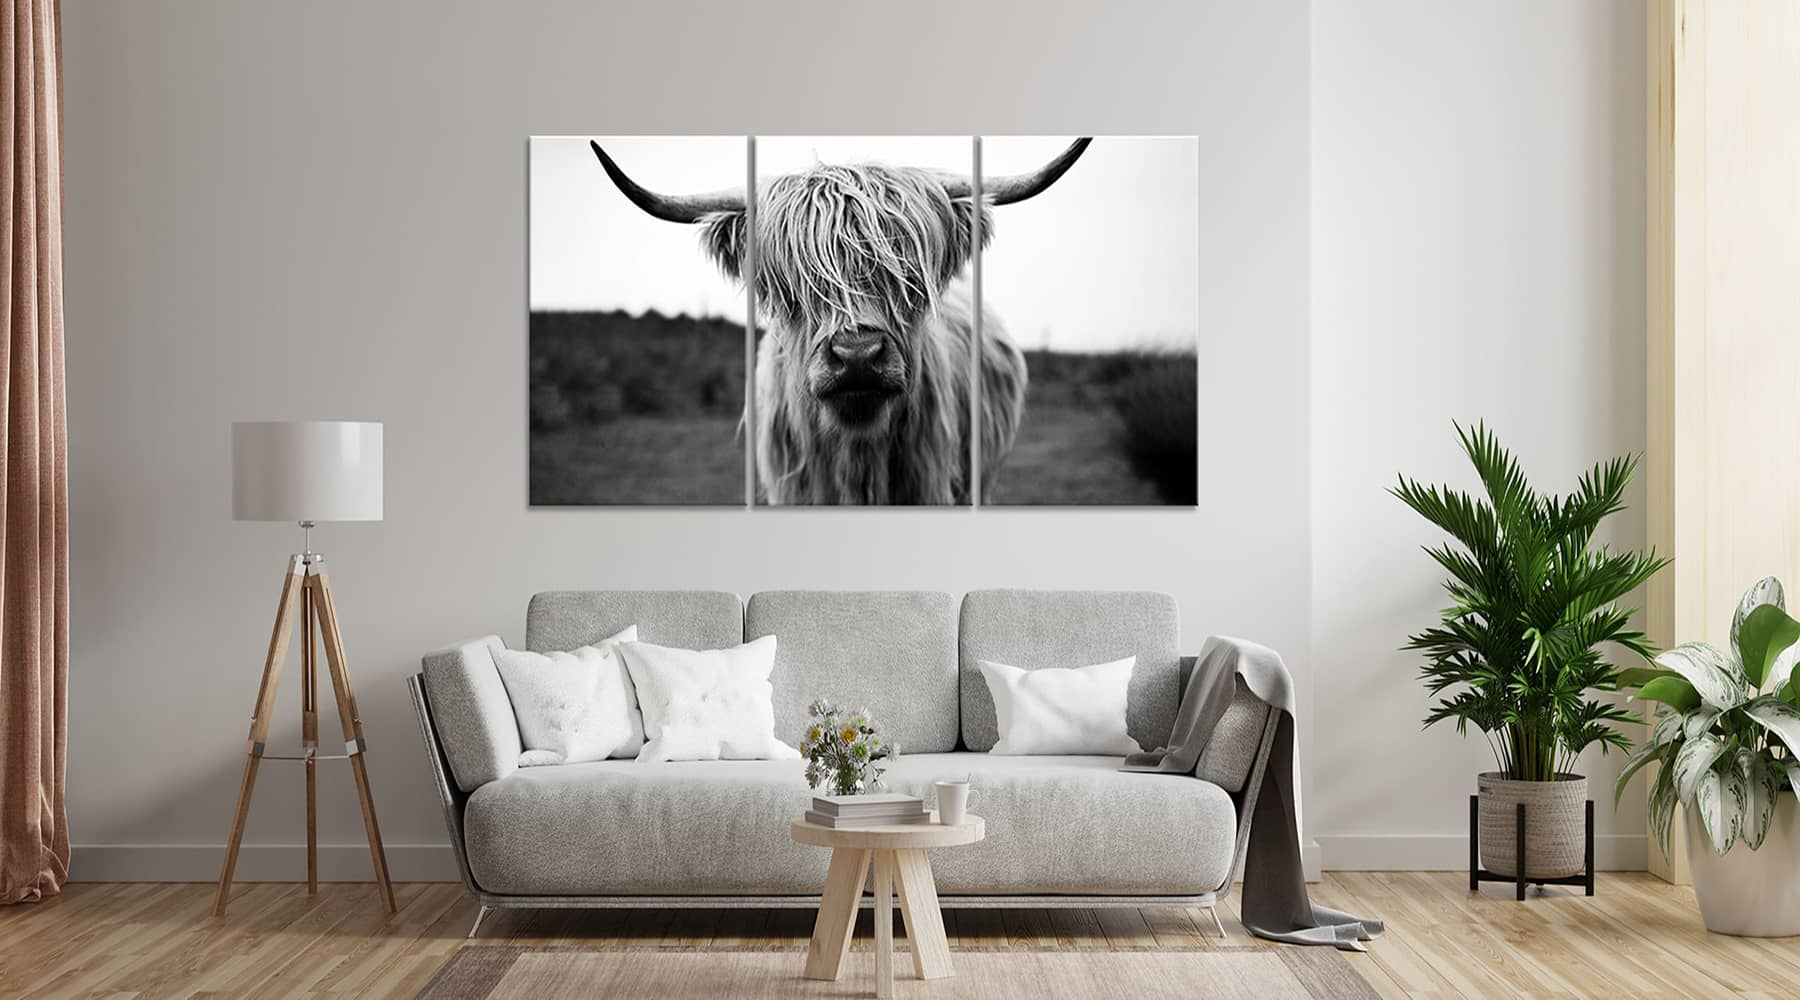 Stunning Canvas Prints: Elevate Your Décor with High-Quality Artwork